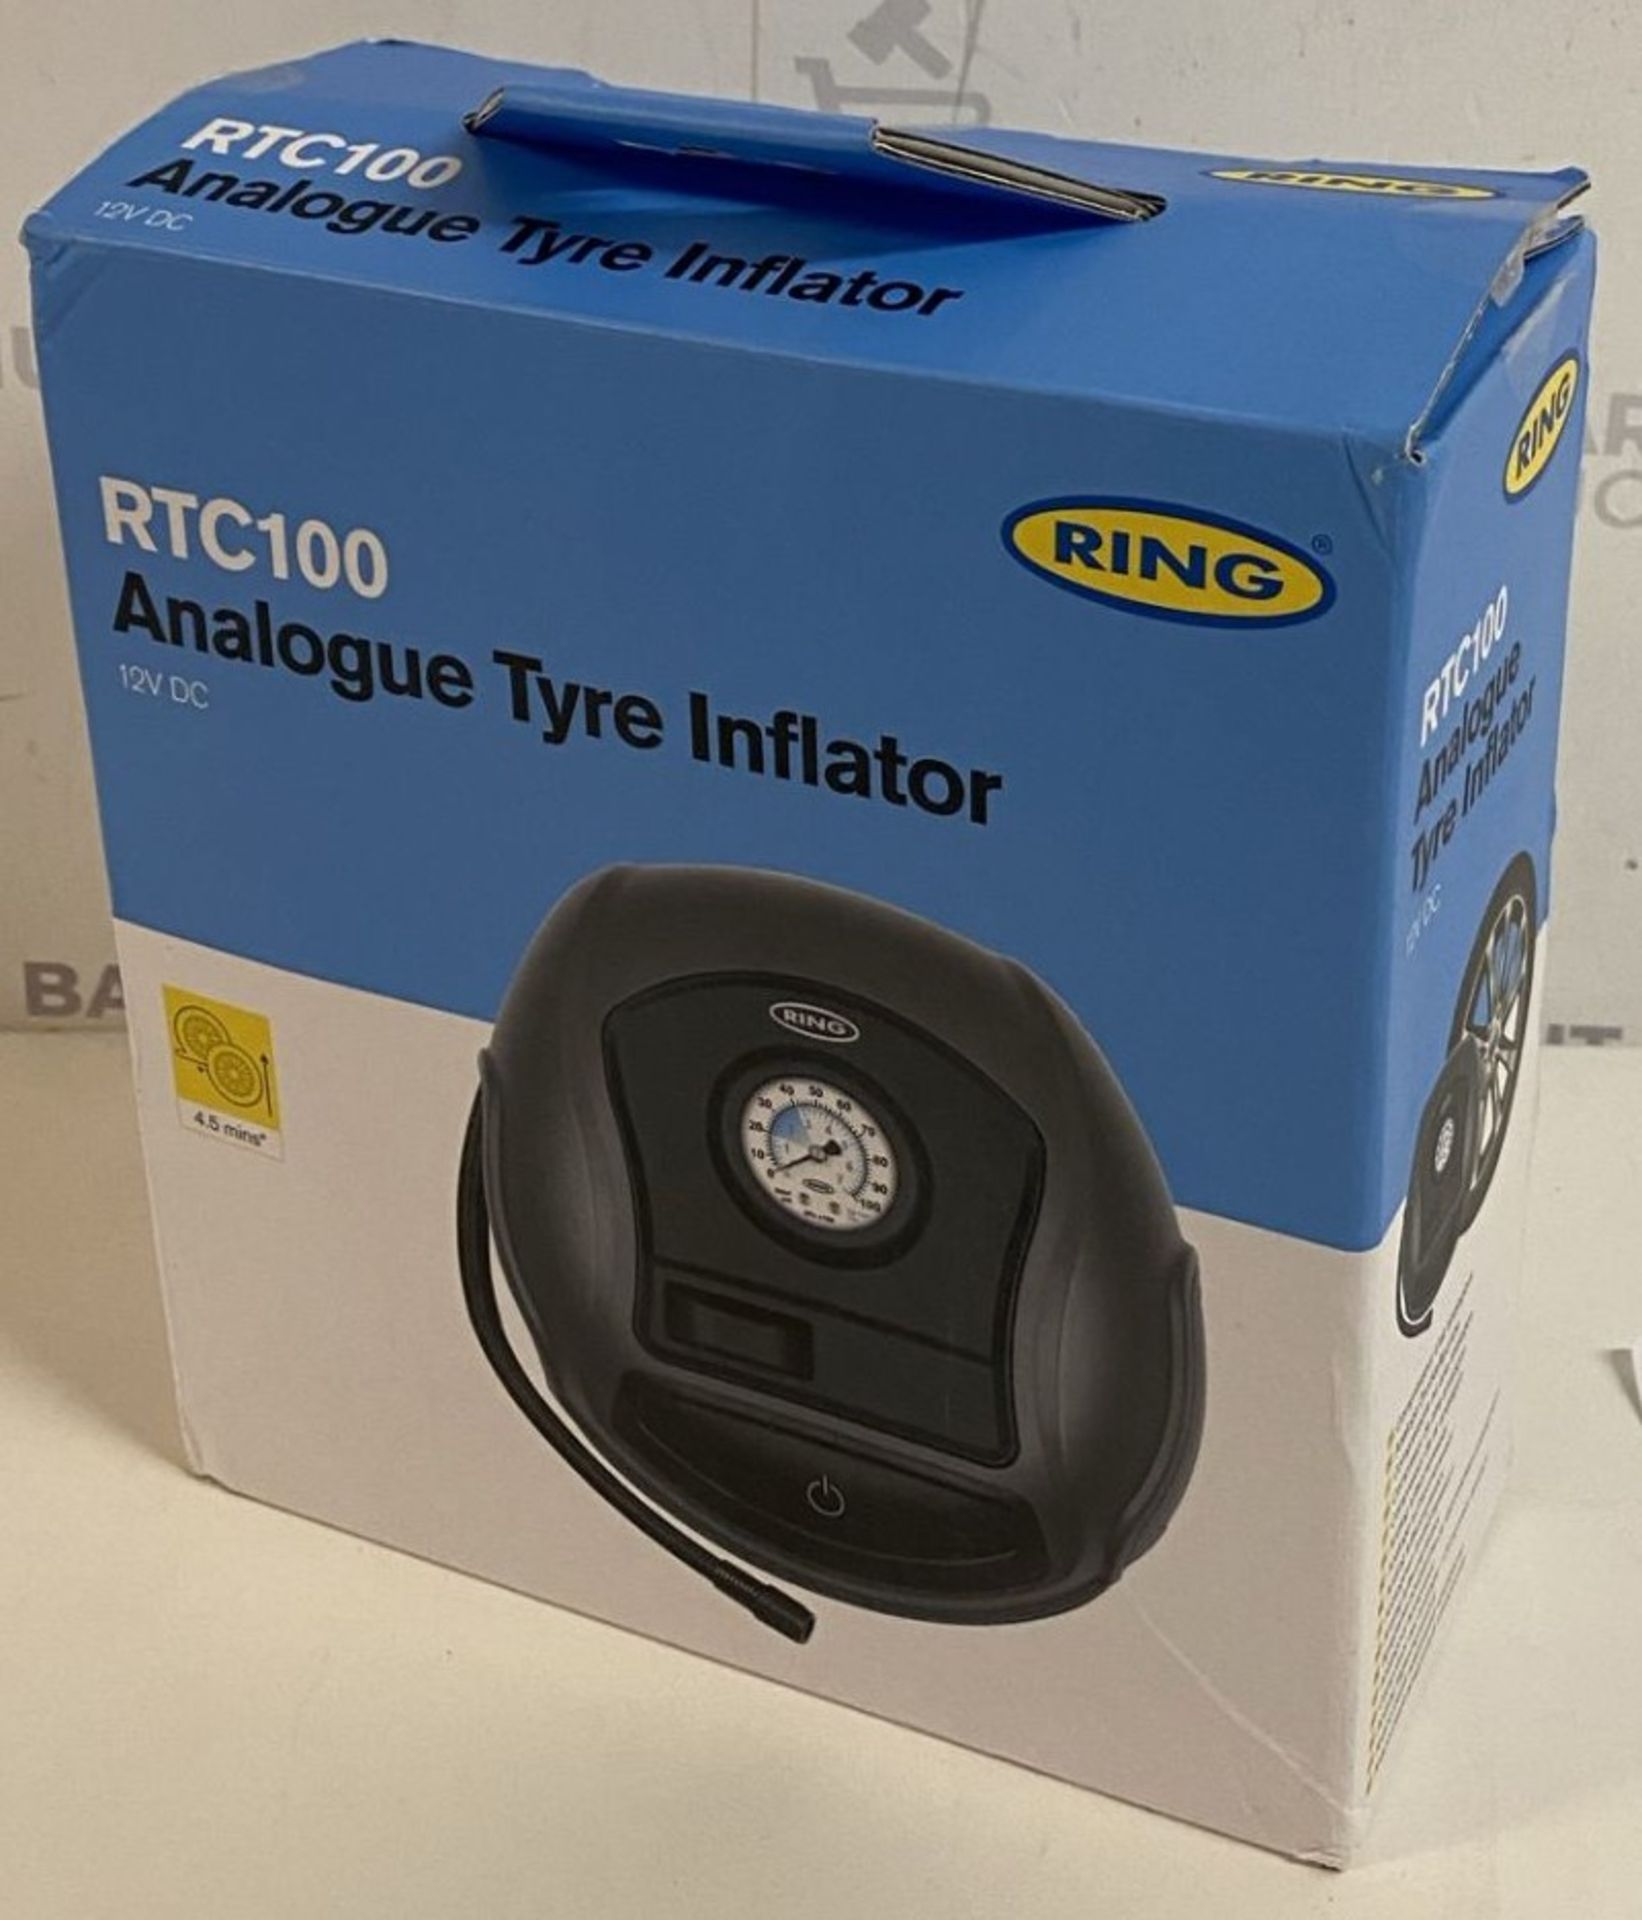 Ring RTC100 Analogue Tyre Inflator 12V/DC